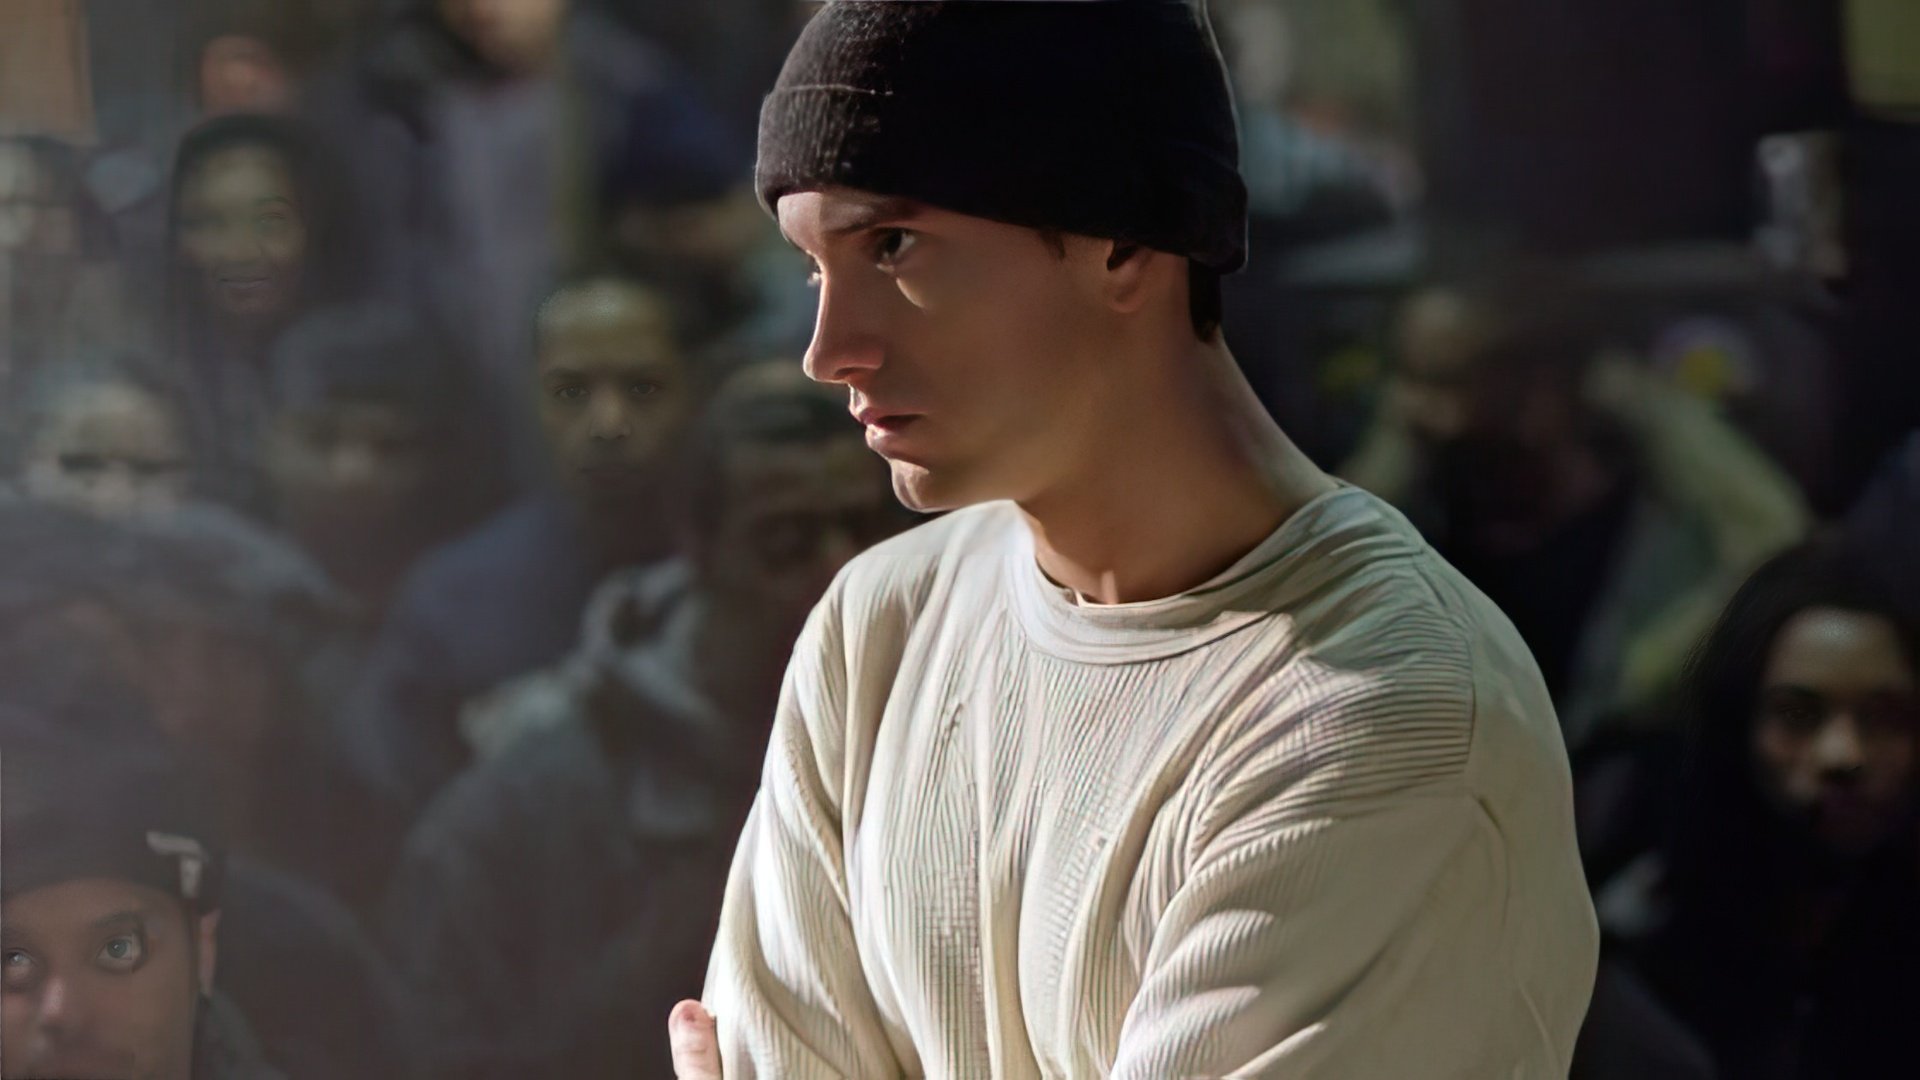 The film '8 Mile' starring Eminem is largely autobiographical